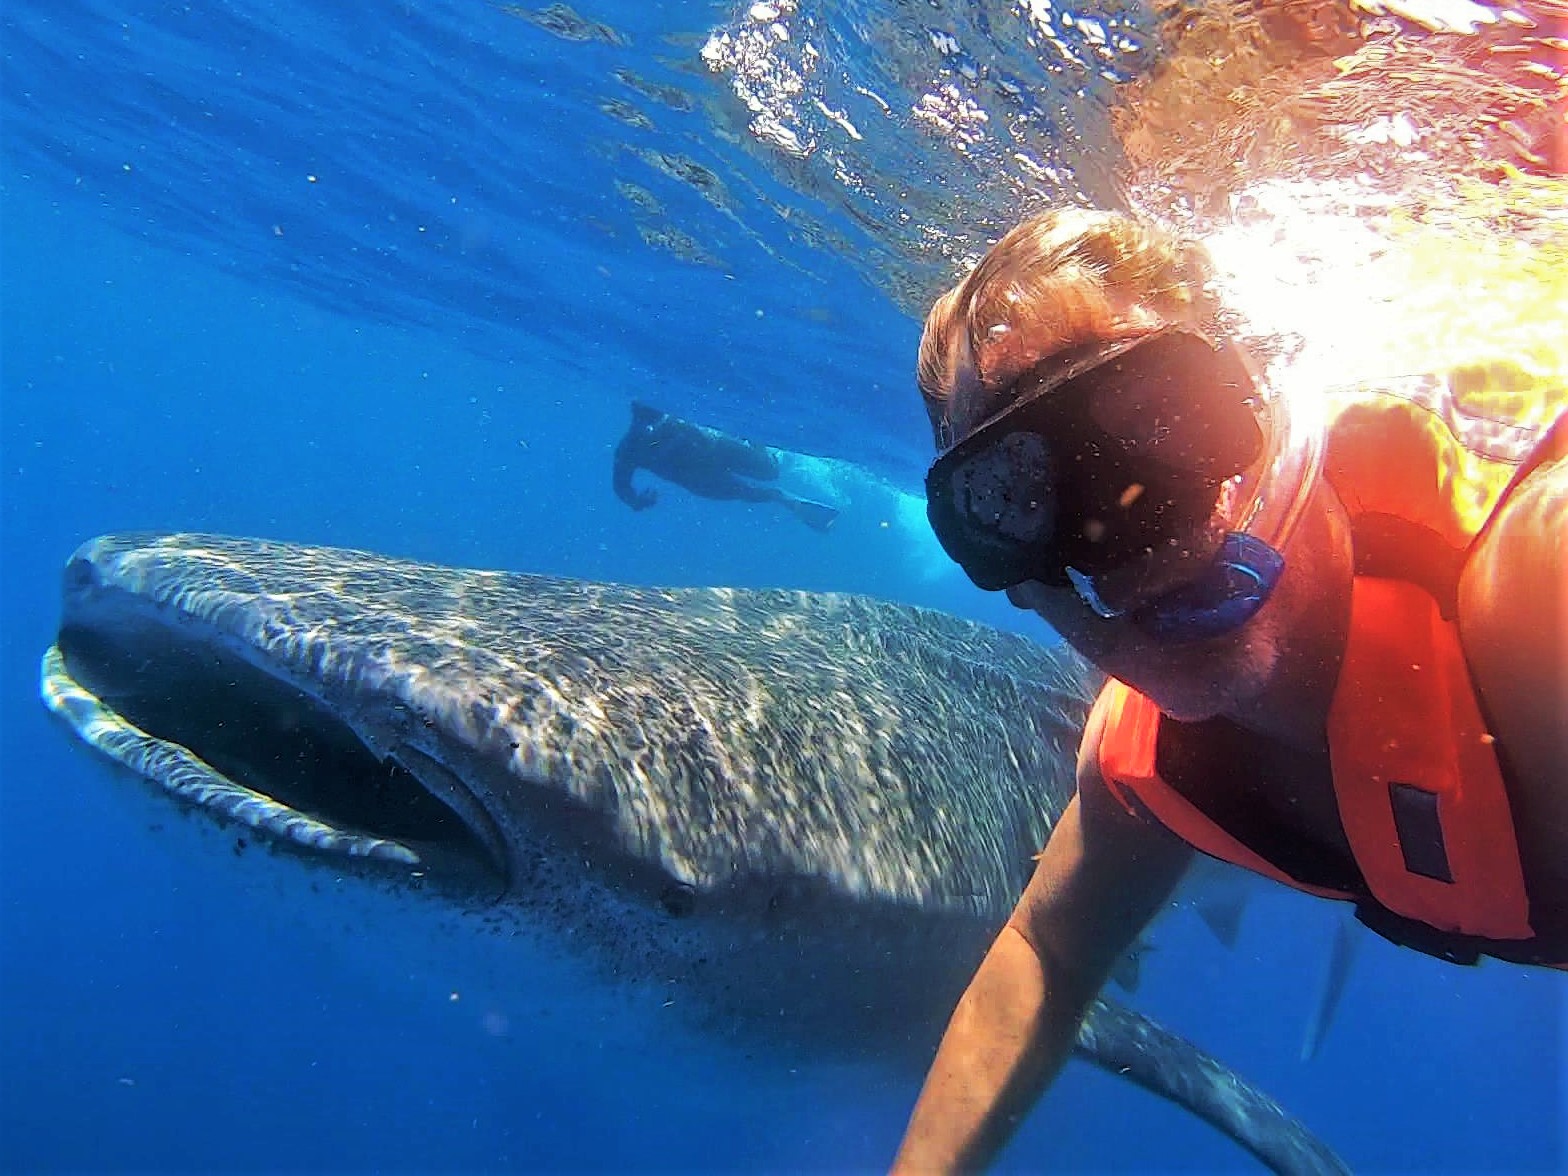 Swimming with whale sharks is quite the experience